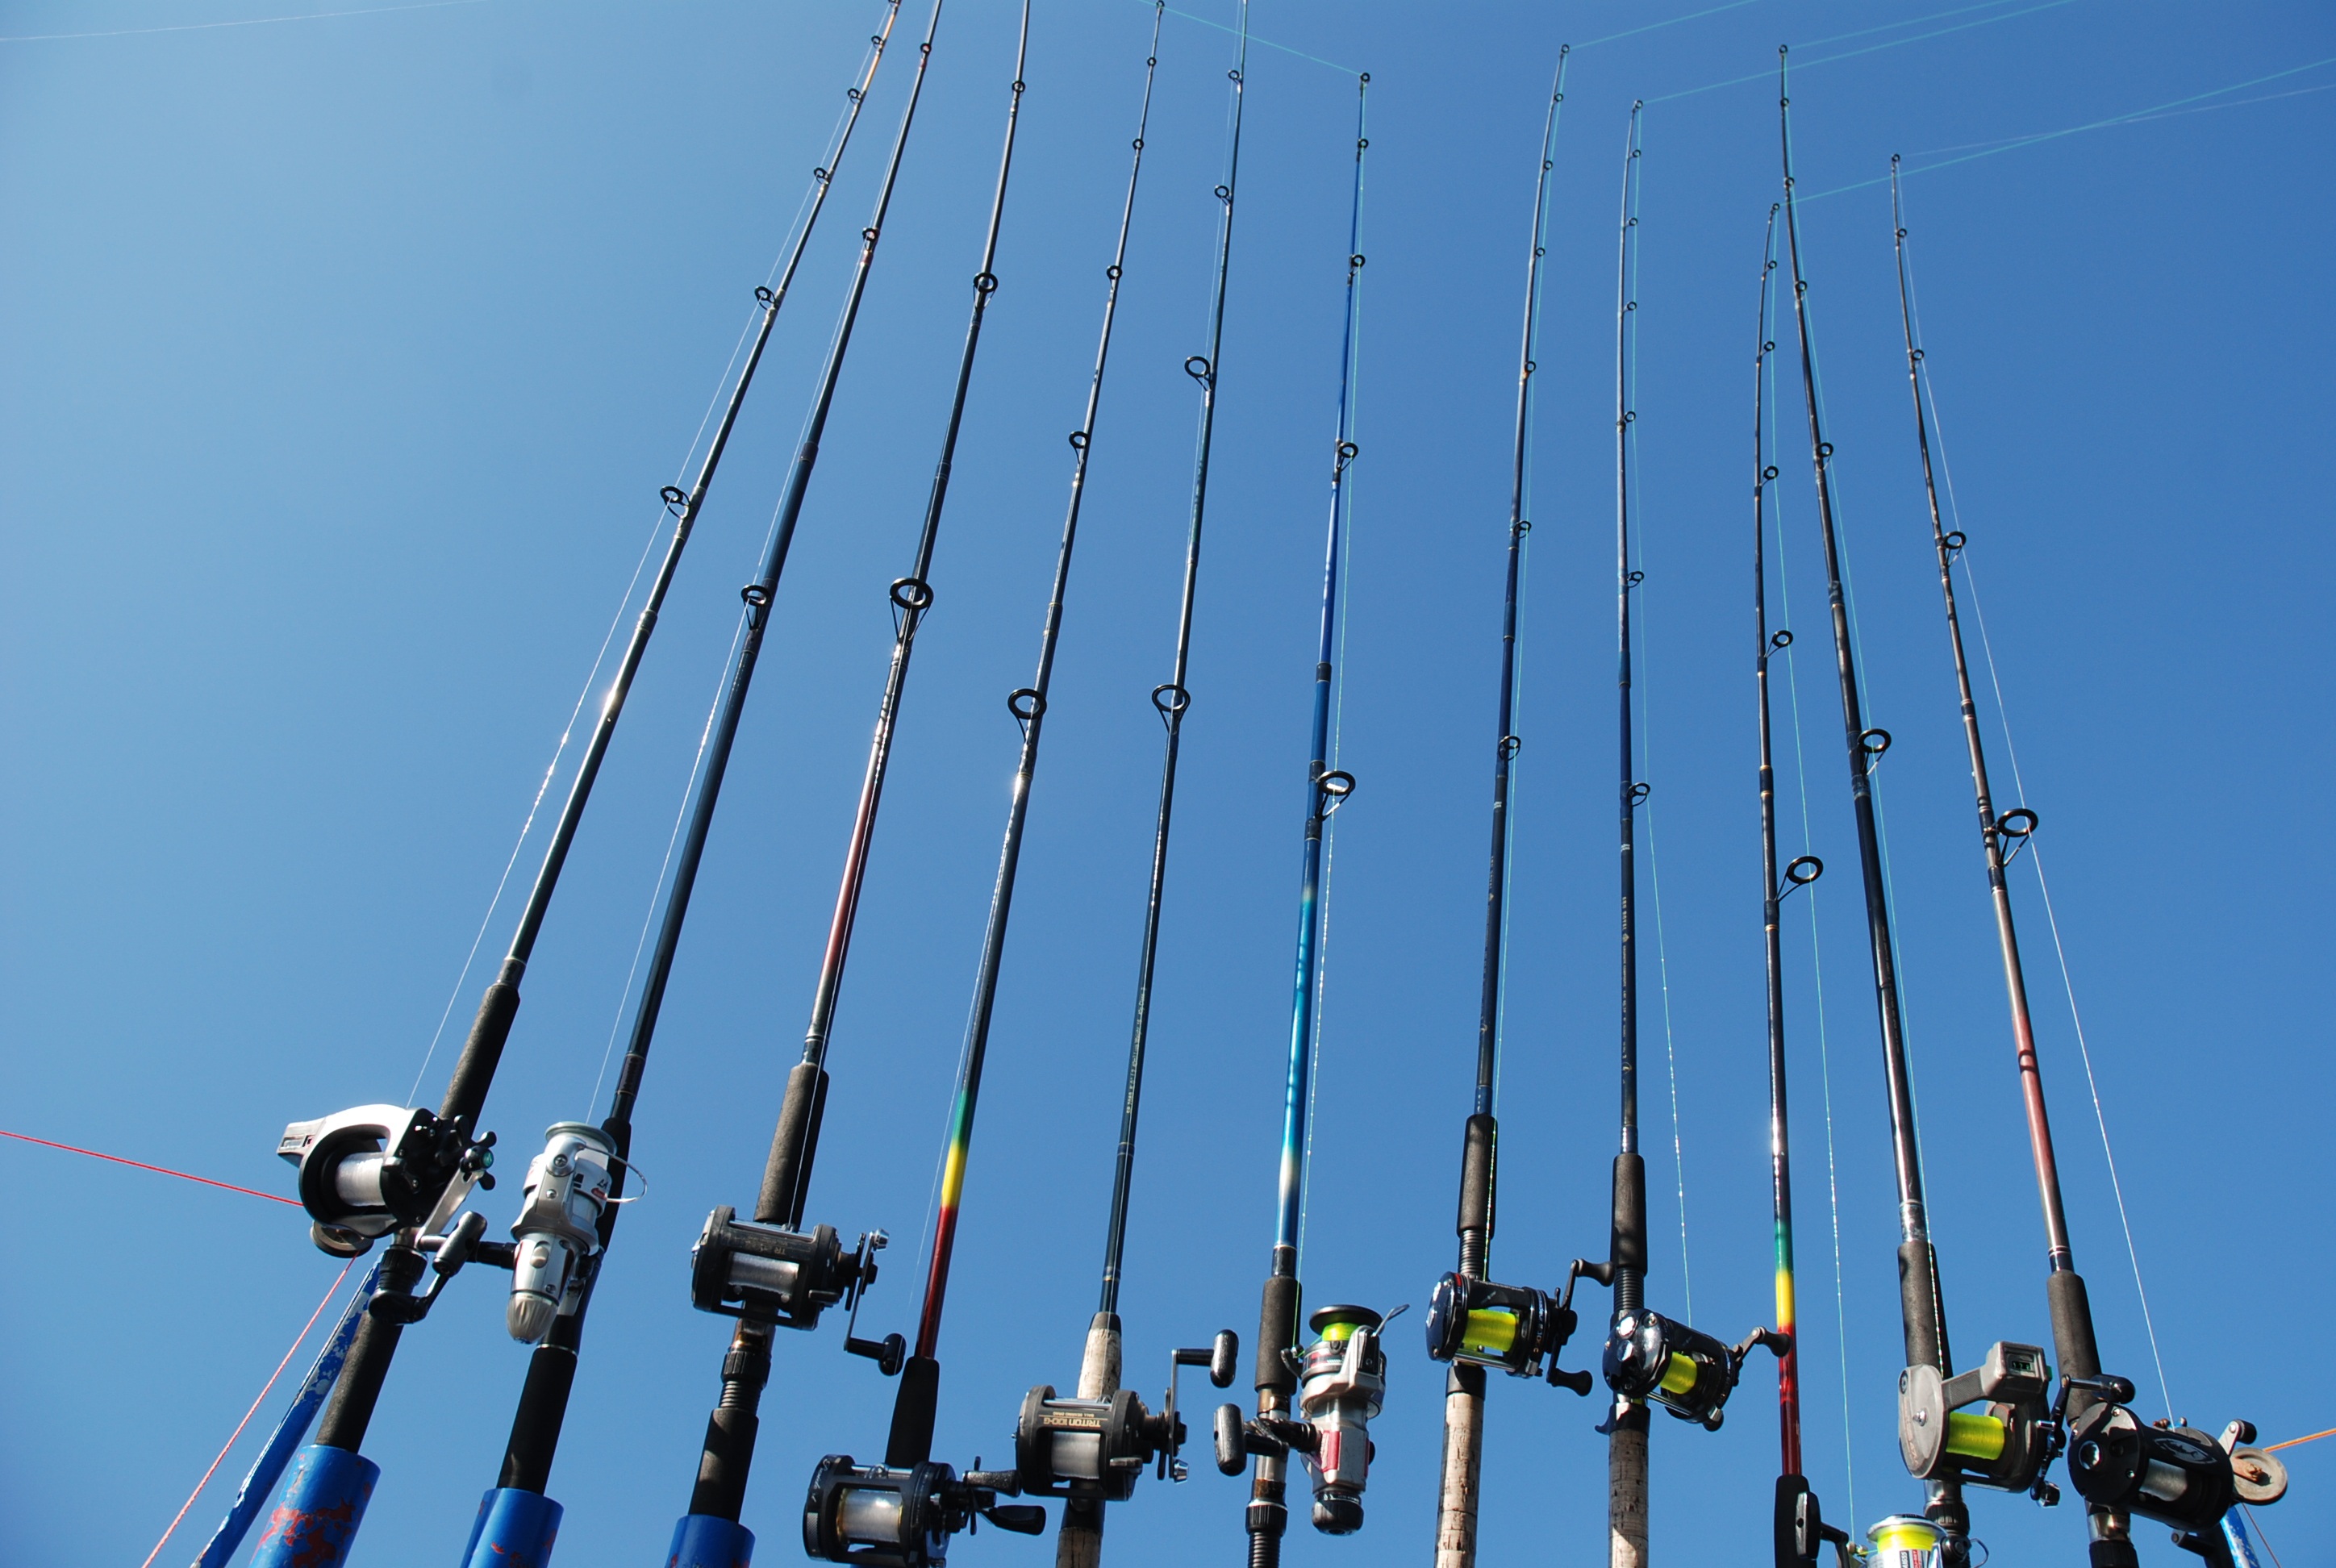 A row of fishing rods and reels